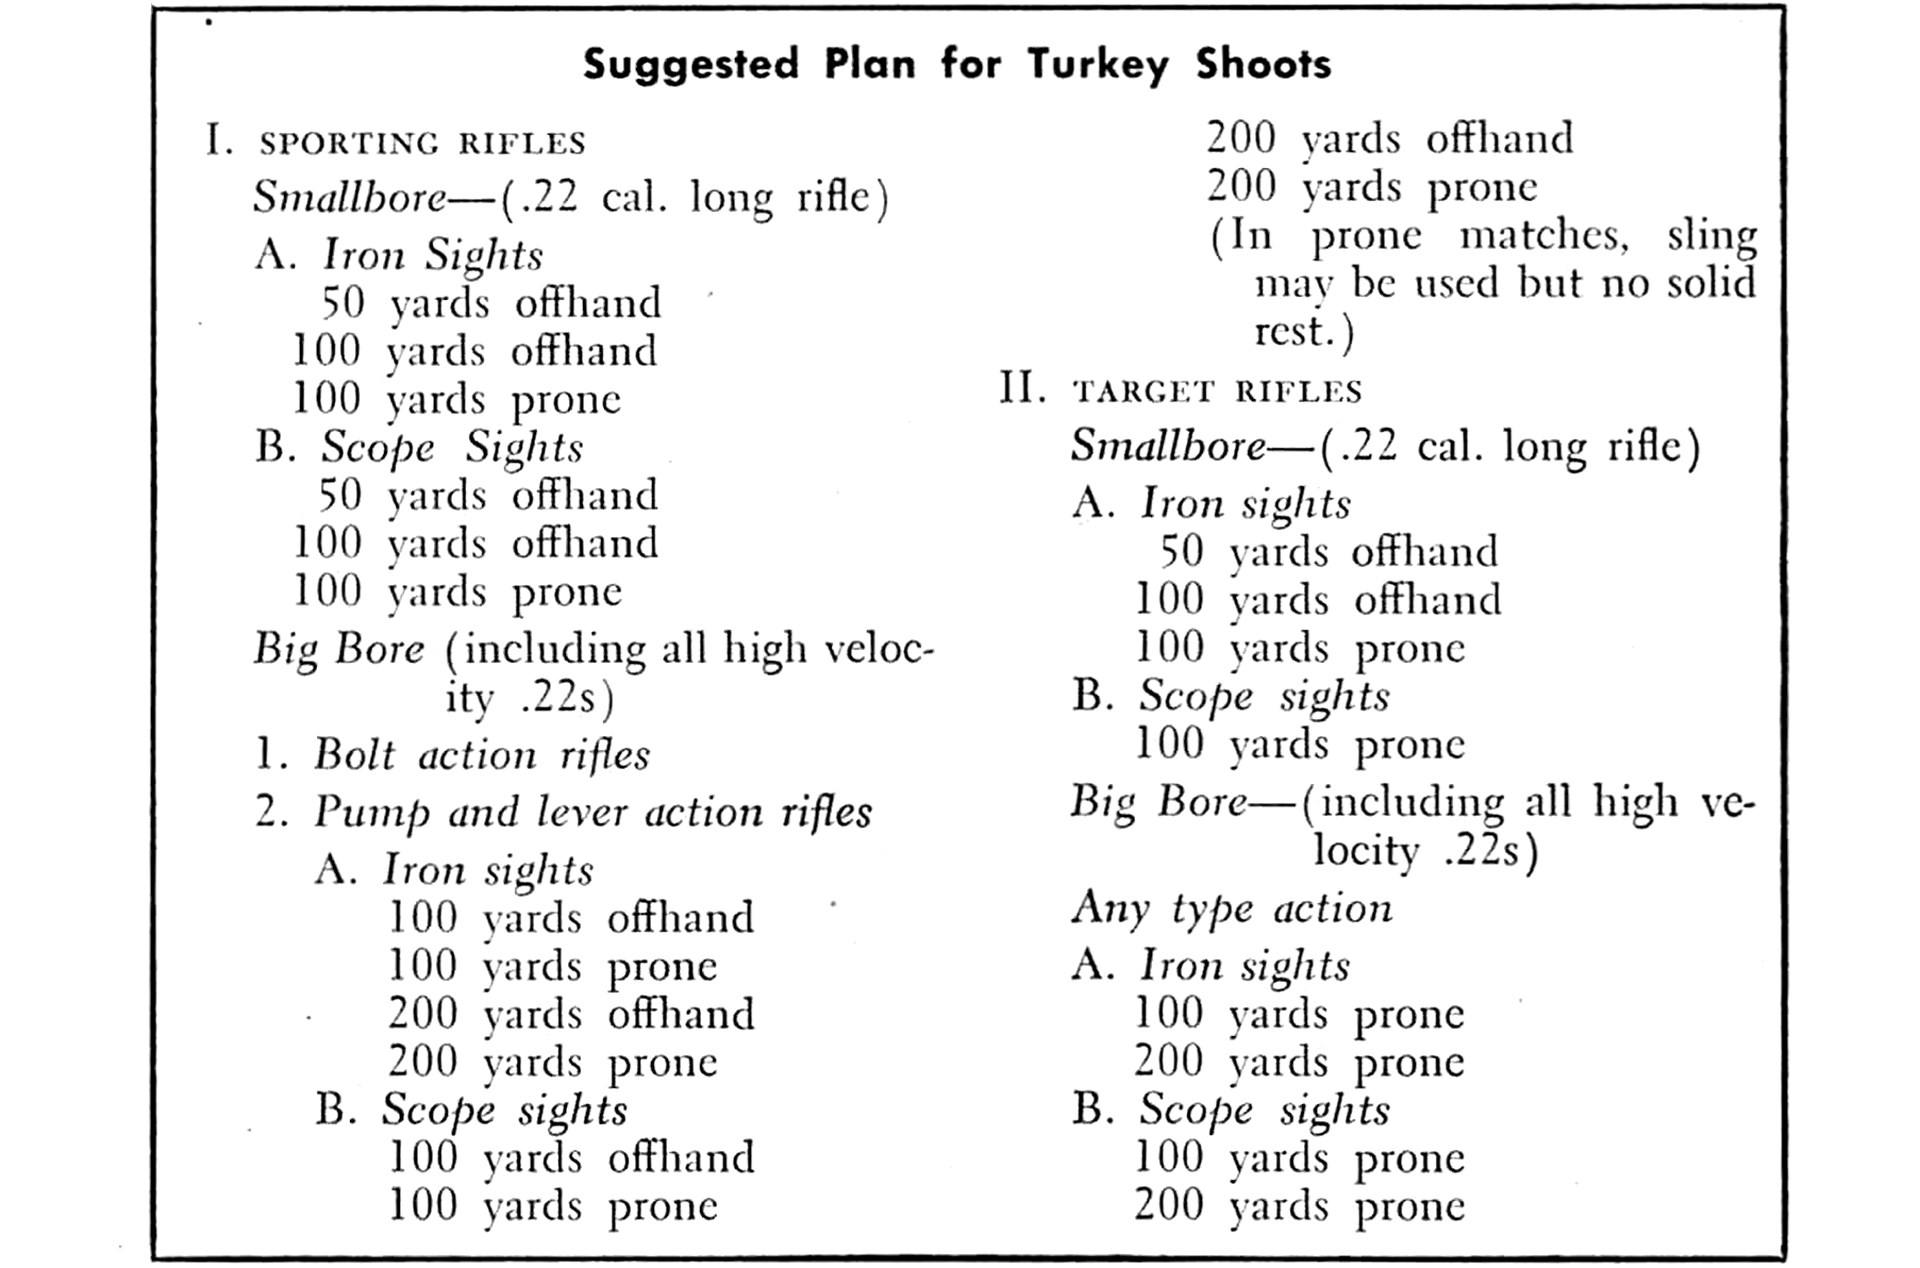 turkey shoot plan text on image outline rules